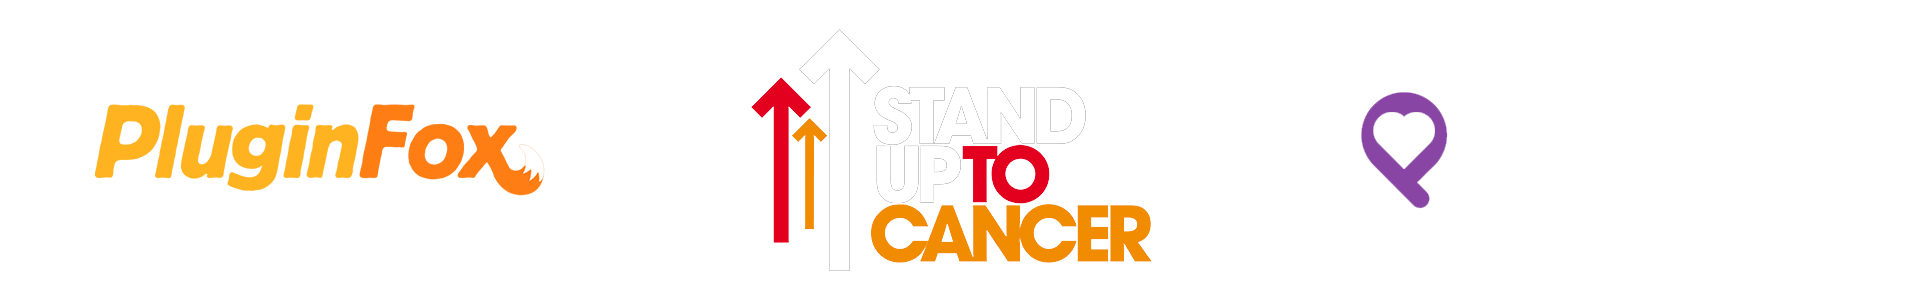 PluginFox Stand Up To Cancer Banner